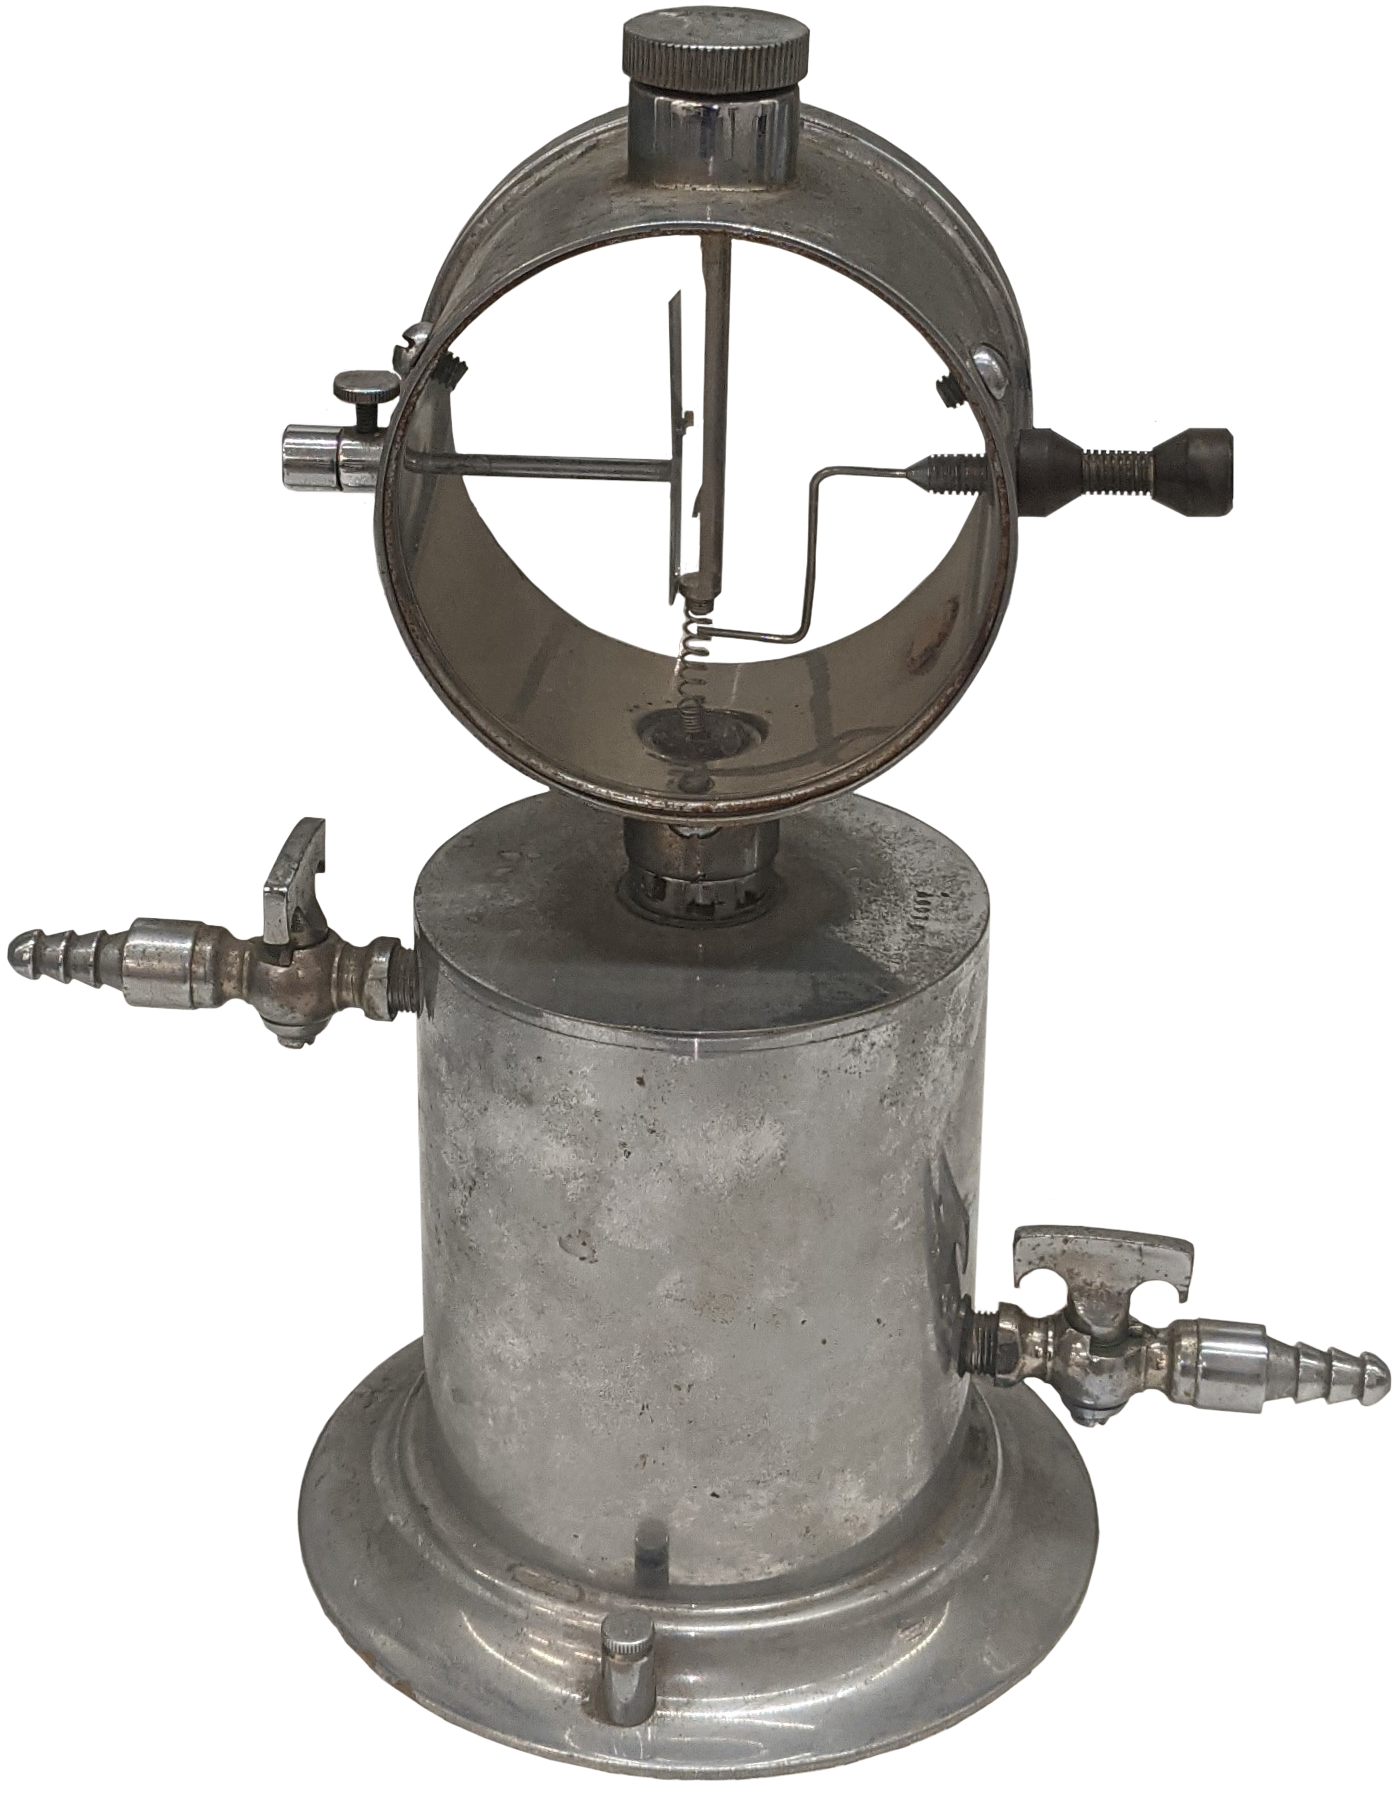 Lind Electroscope, circa. early 20th century